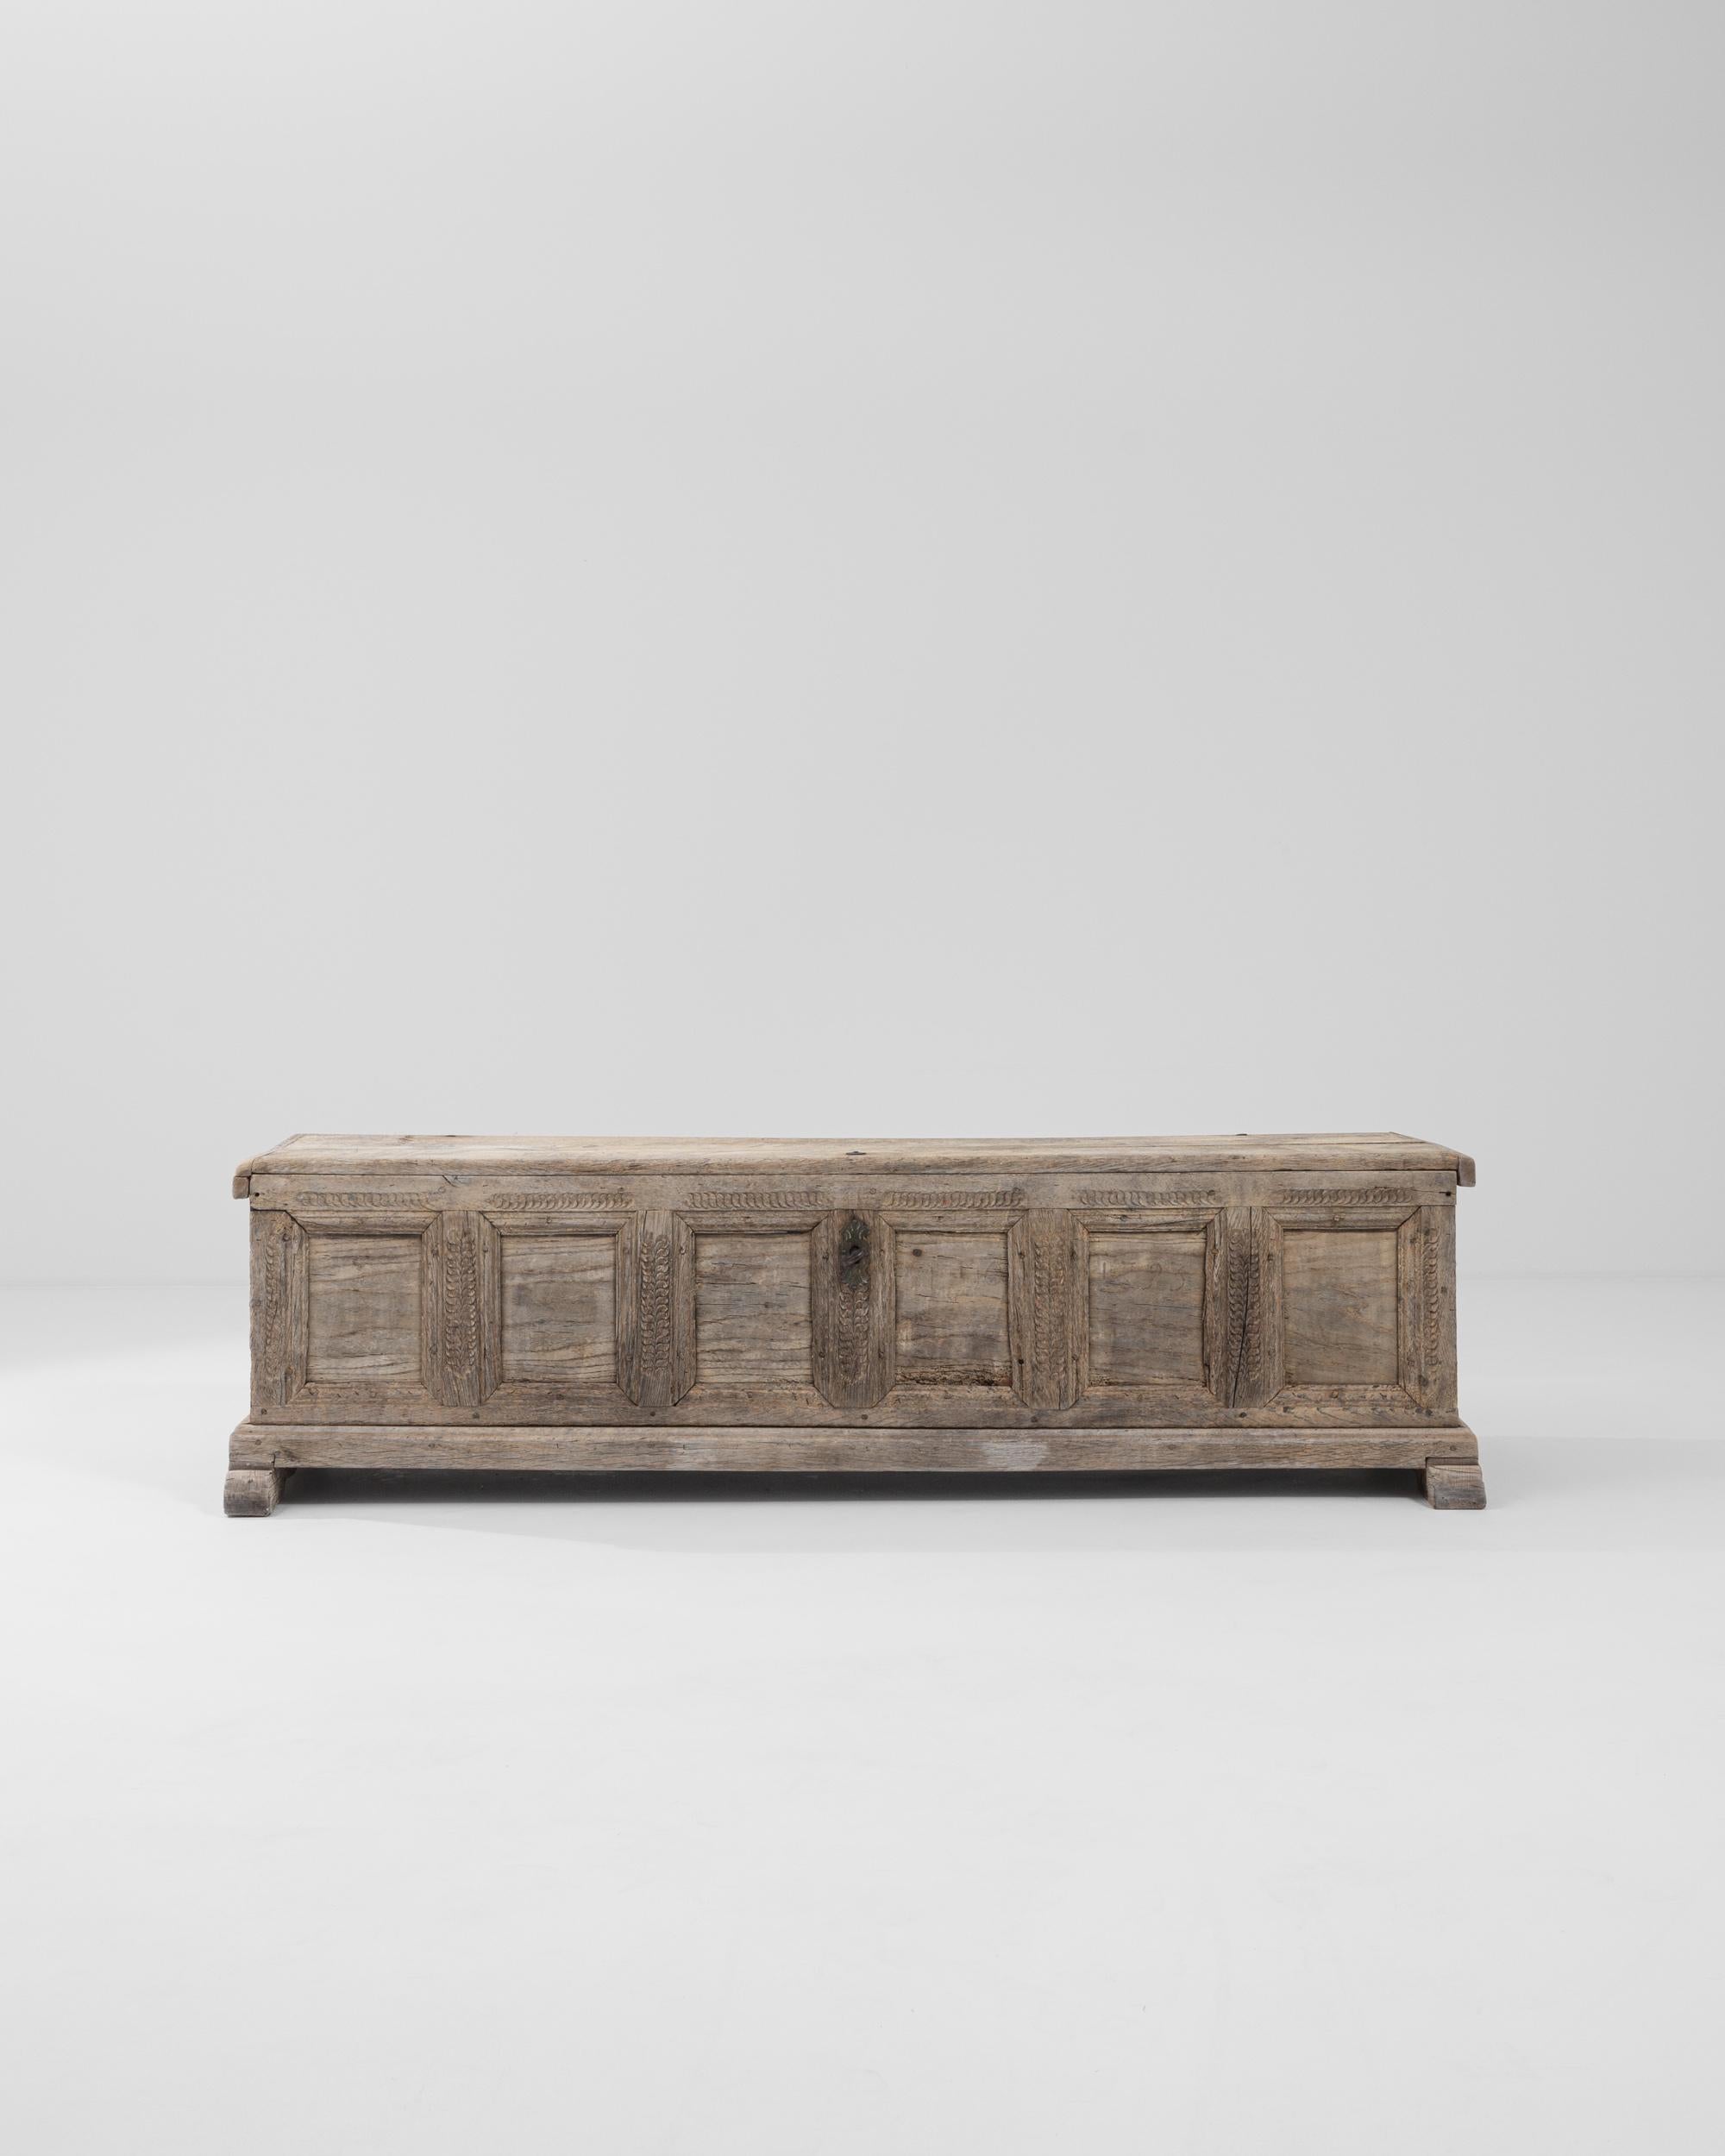 A wooden trunk from 18th century, France. The charming rustic quality of this expansive wooden trunk has been elevated by the fastidiously hand-carved leaf patterning that wreathes its six rectangular panels. The time touched wood, accompanied by